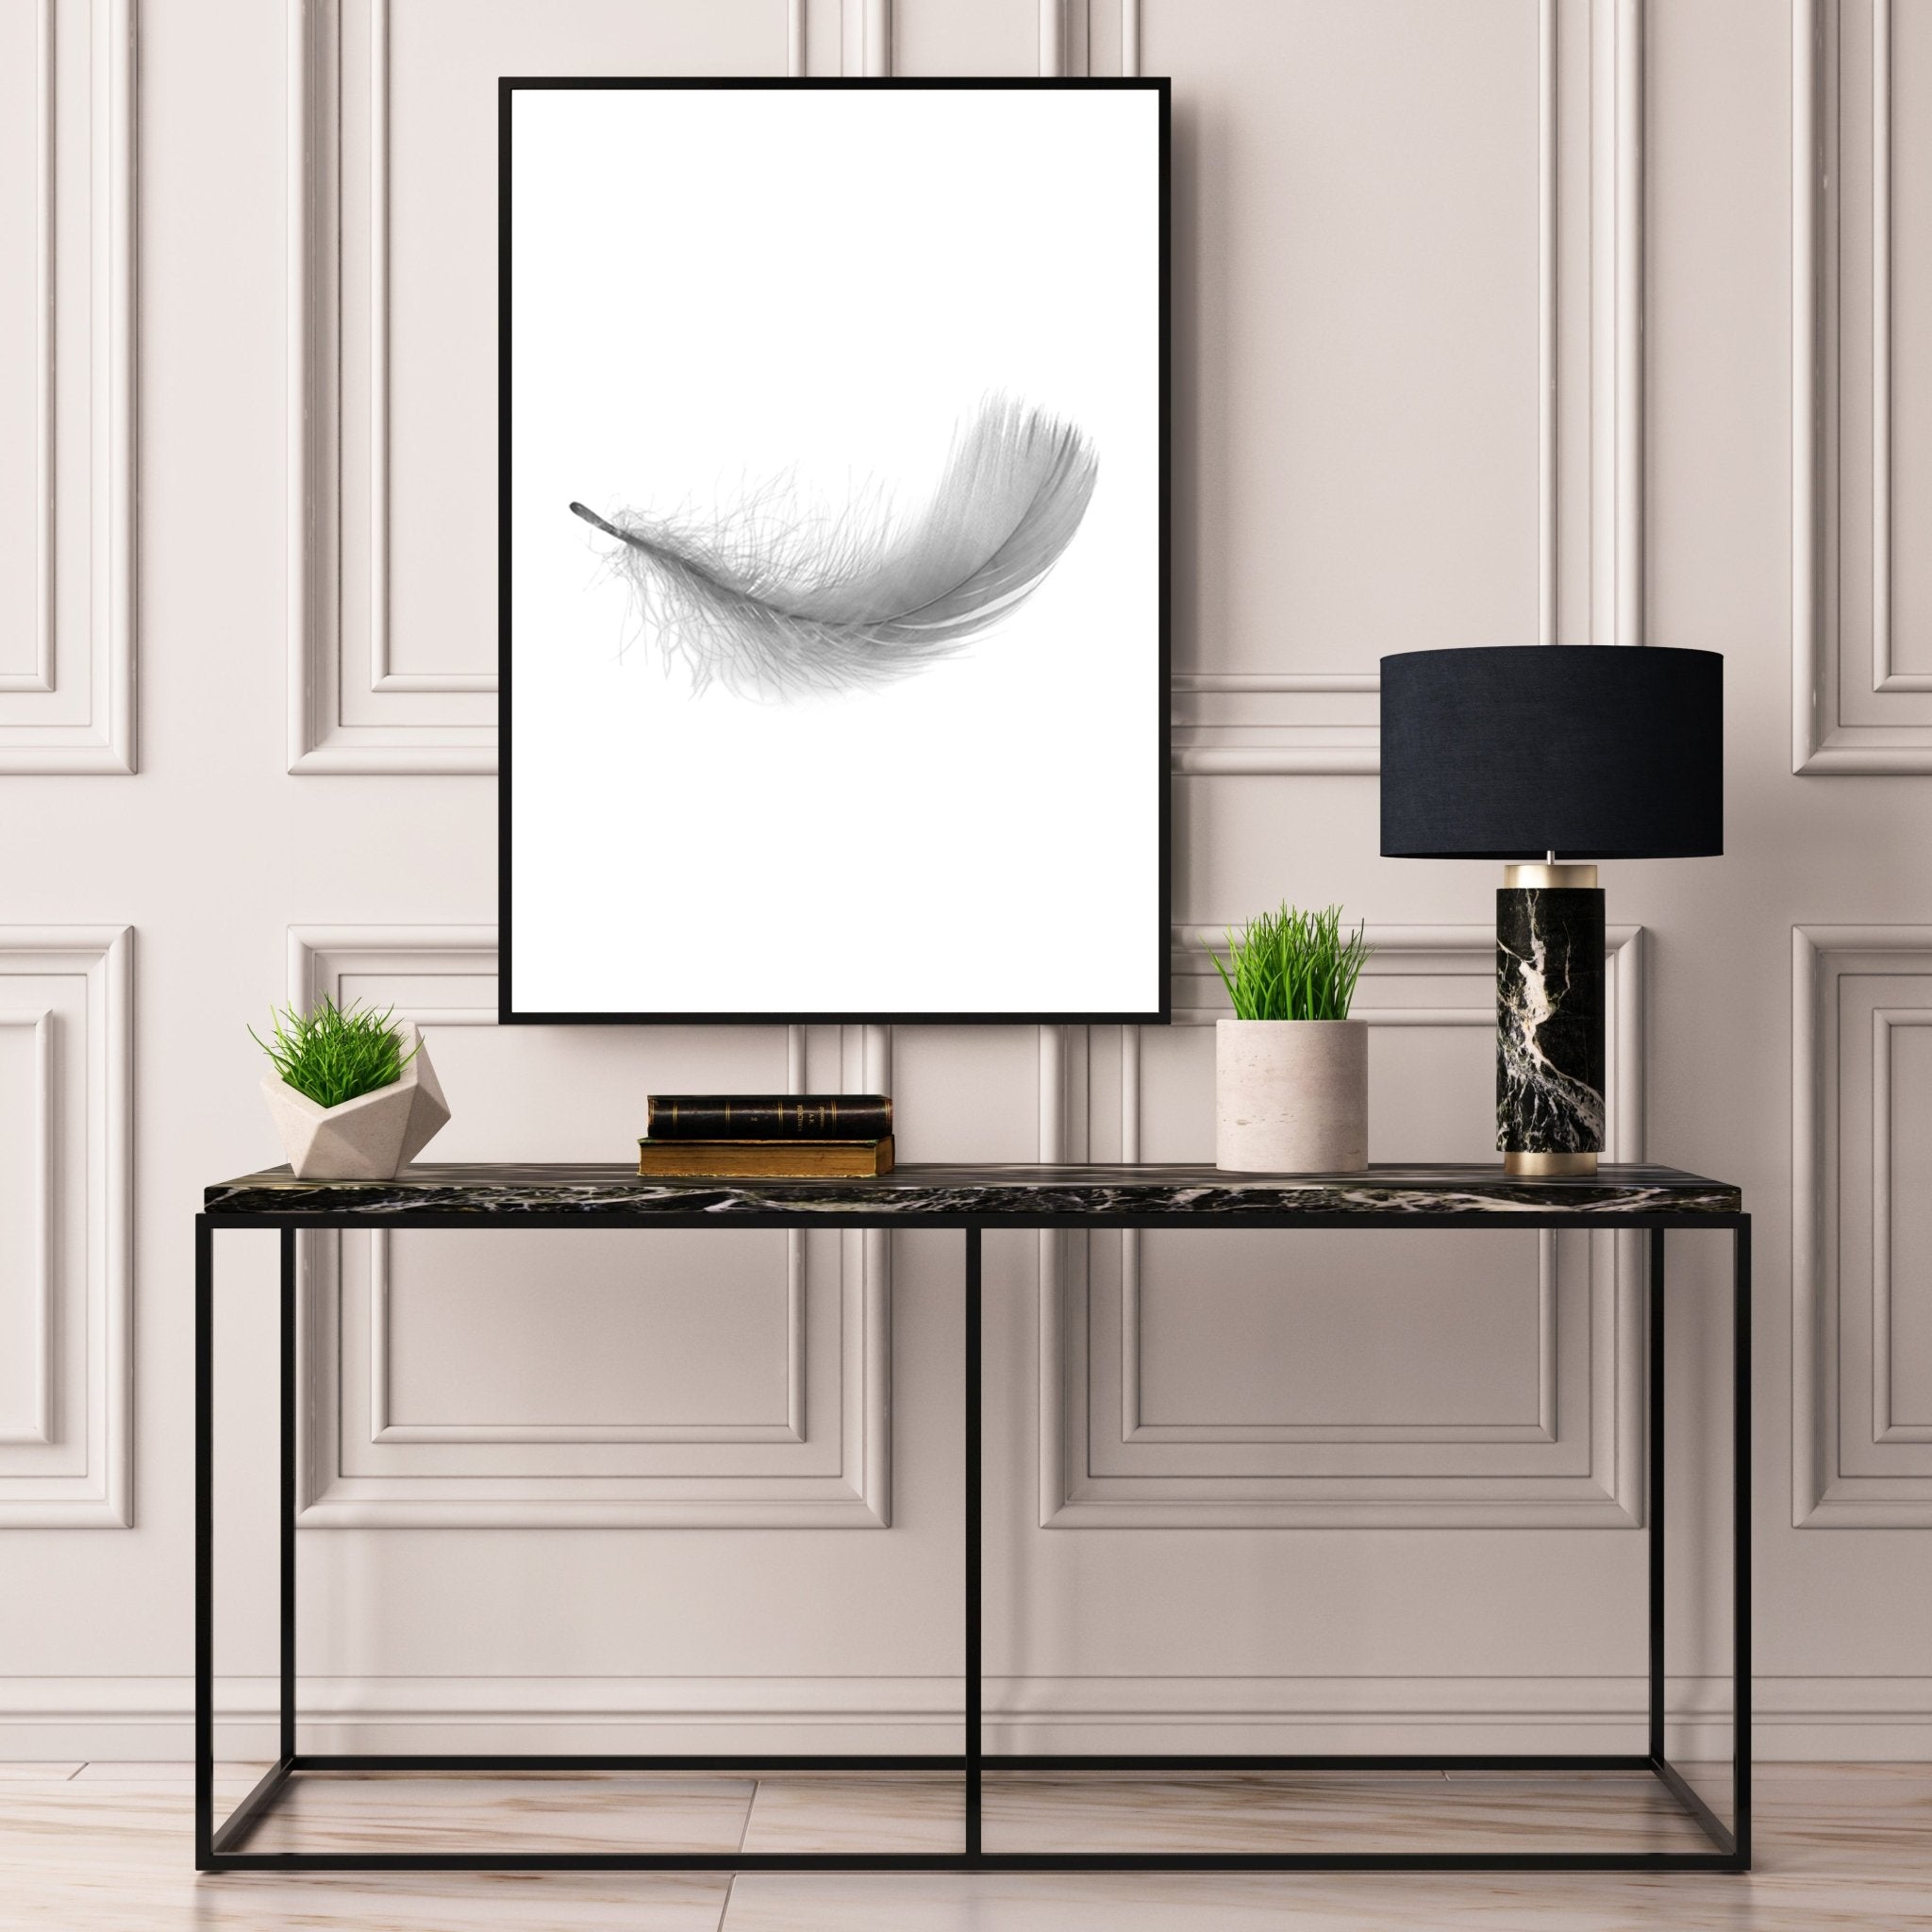 Grey Feather II - D'Luxe Prints